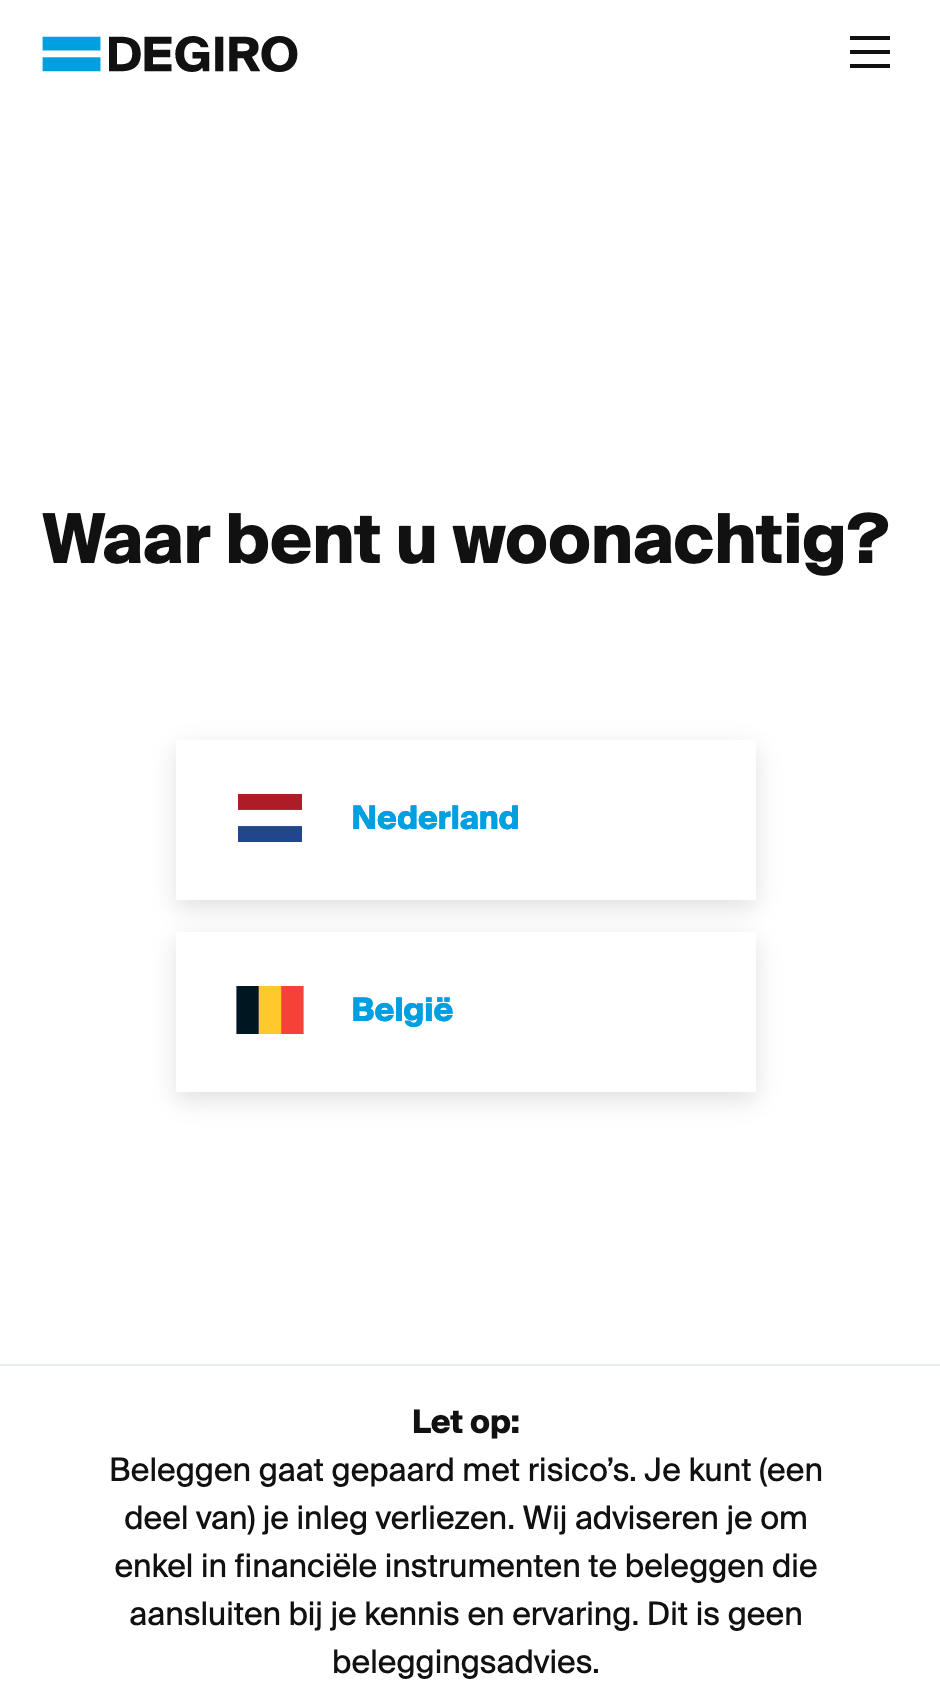 Choosing your country of residence as a Belgian signing up for DEGIRO